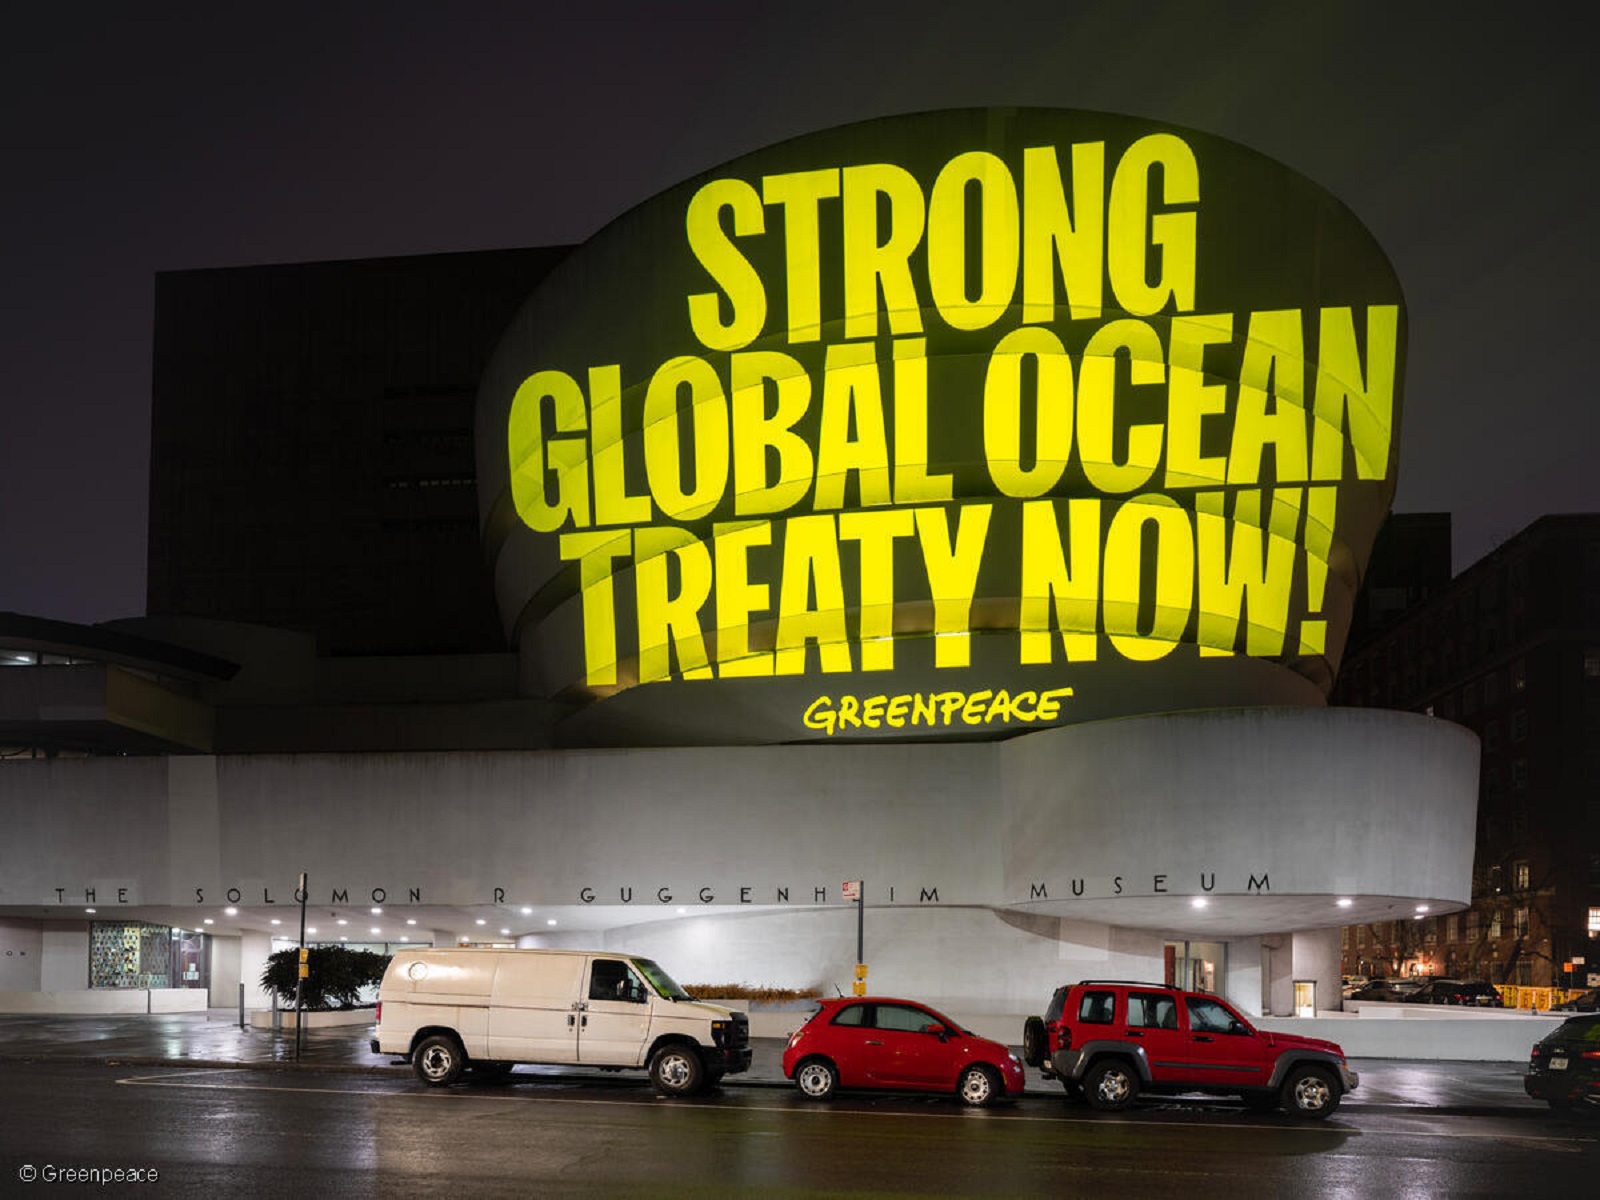 Greenpeace USA activists project a message reading: “Strong Global Ocean Treaty Now!” onto the iconic Guggenheim Museum  to send a clear message to delegates at the United Nations in New York during the second week of the resumed IGC5 negotiations.

Without a strong Treaty being agreed at this round of talks, it will be practically impossible to protect 30% of the world’s oceans by 2030. This is the minimum scientists say is necessary to allow the oceans to recover from decades of pollution, overfishing, and other industrial activities.